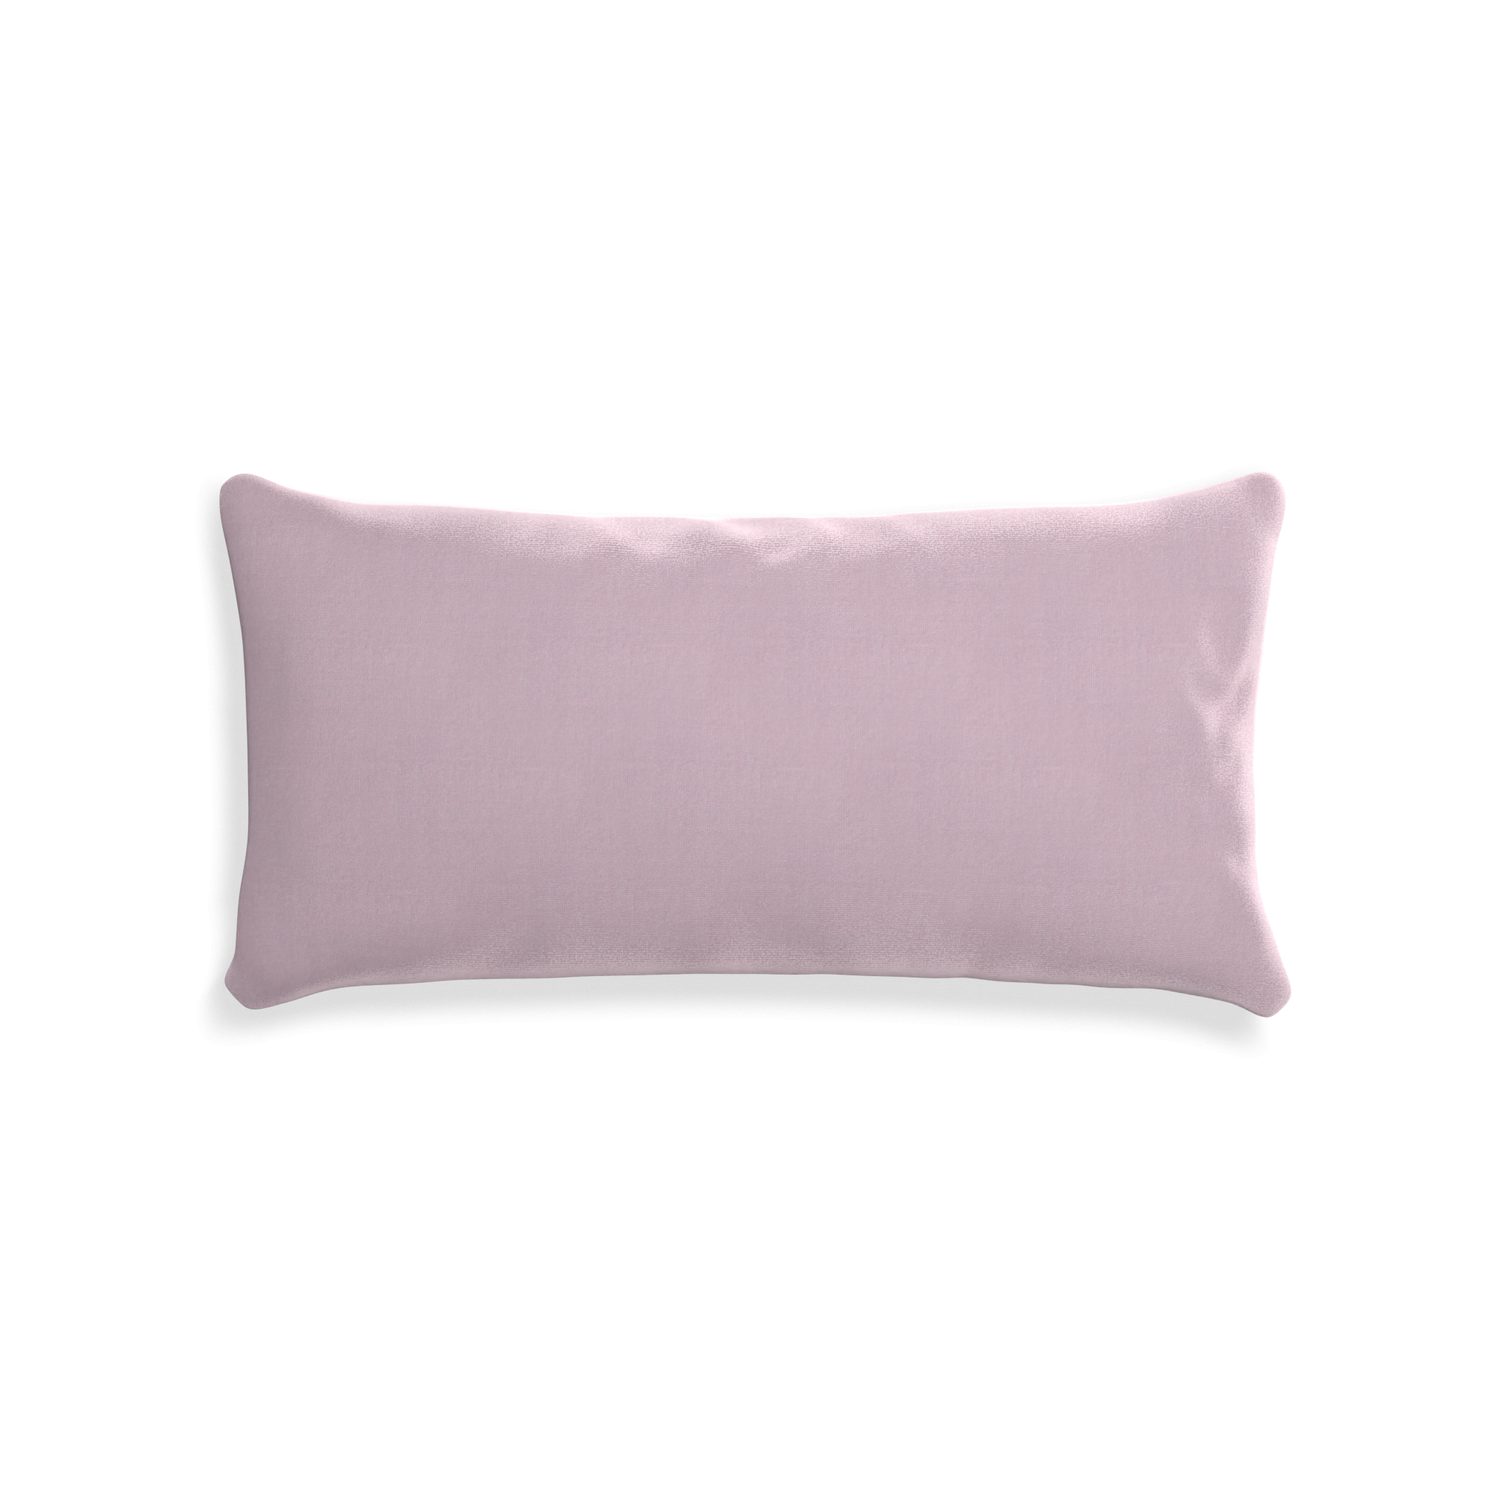 Midi-lumbar lilac velvet custom lilacpillow with none on white background